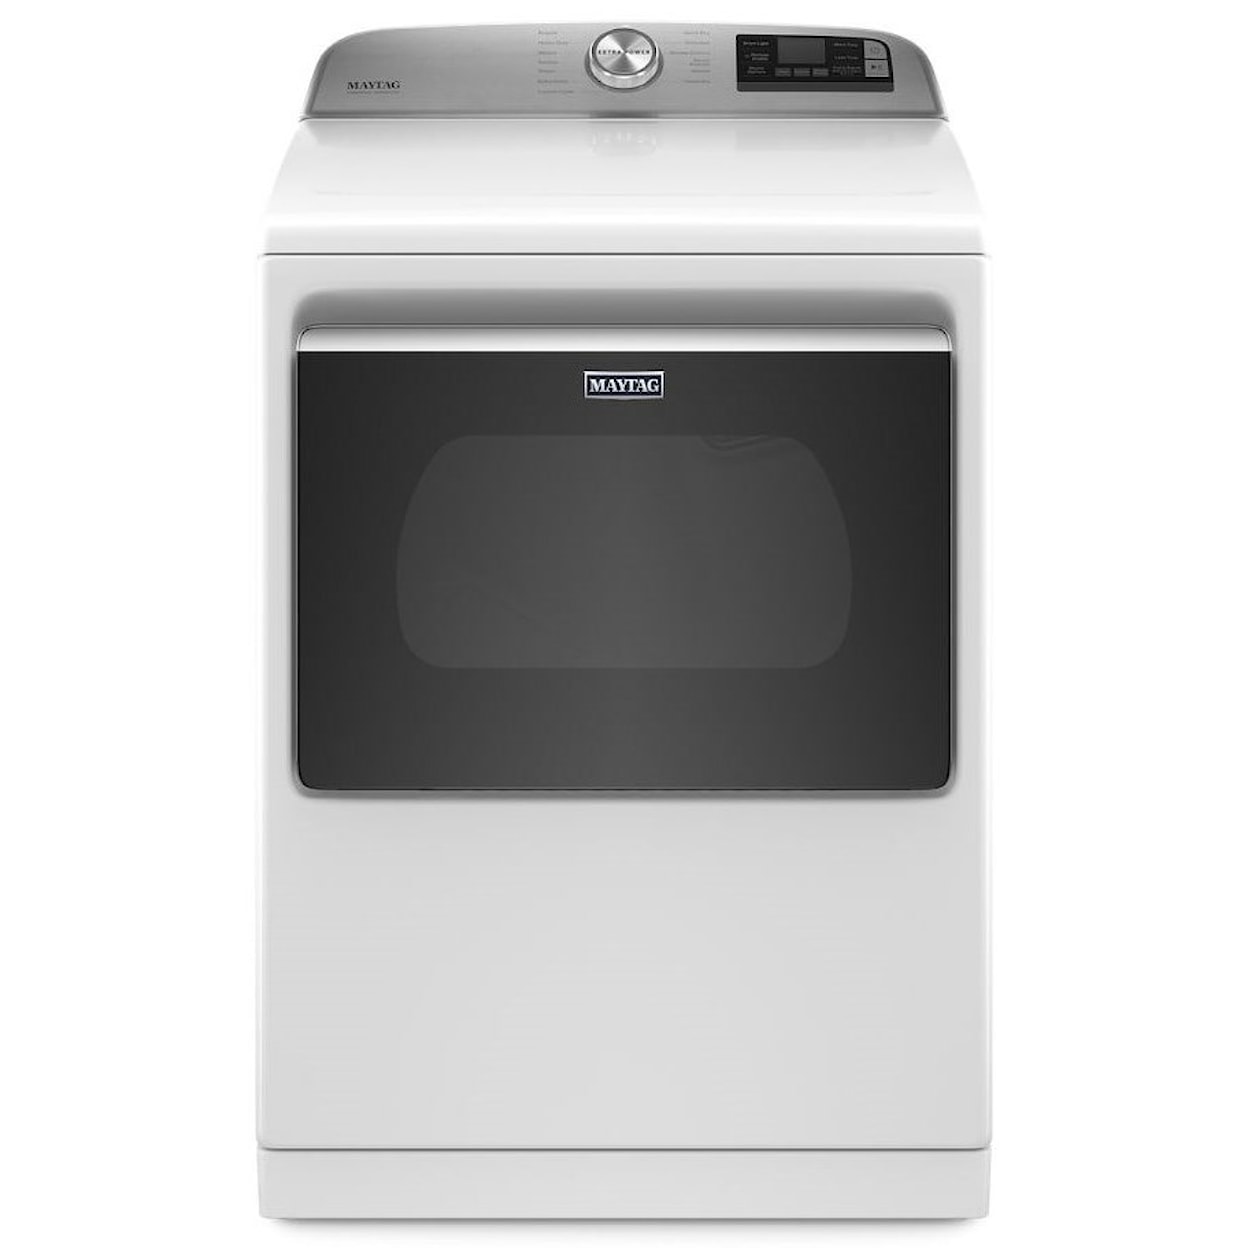 Maytag Front Load Electric Dryers 7.4 CU. FT Smart Capable Electric Dryer